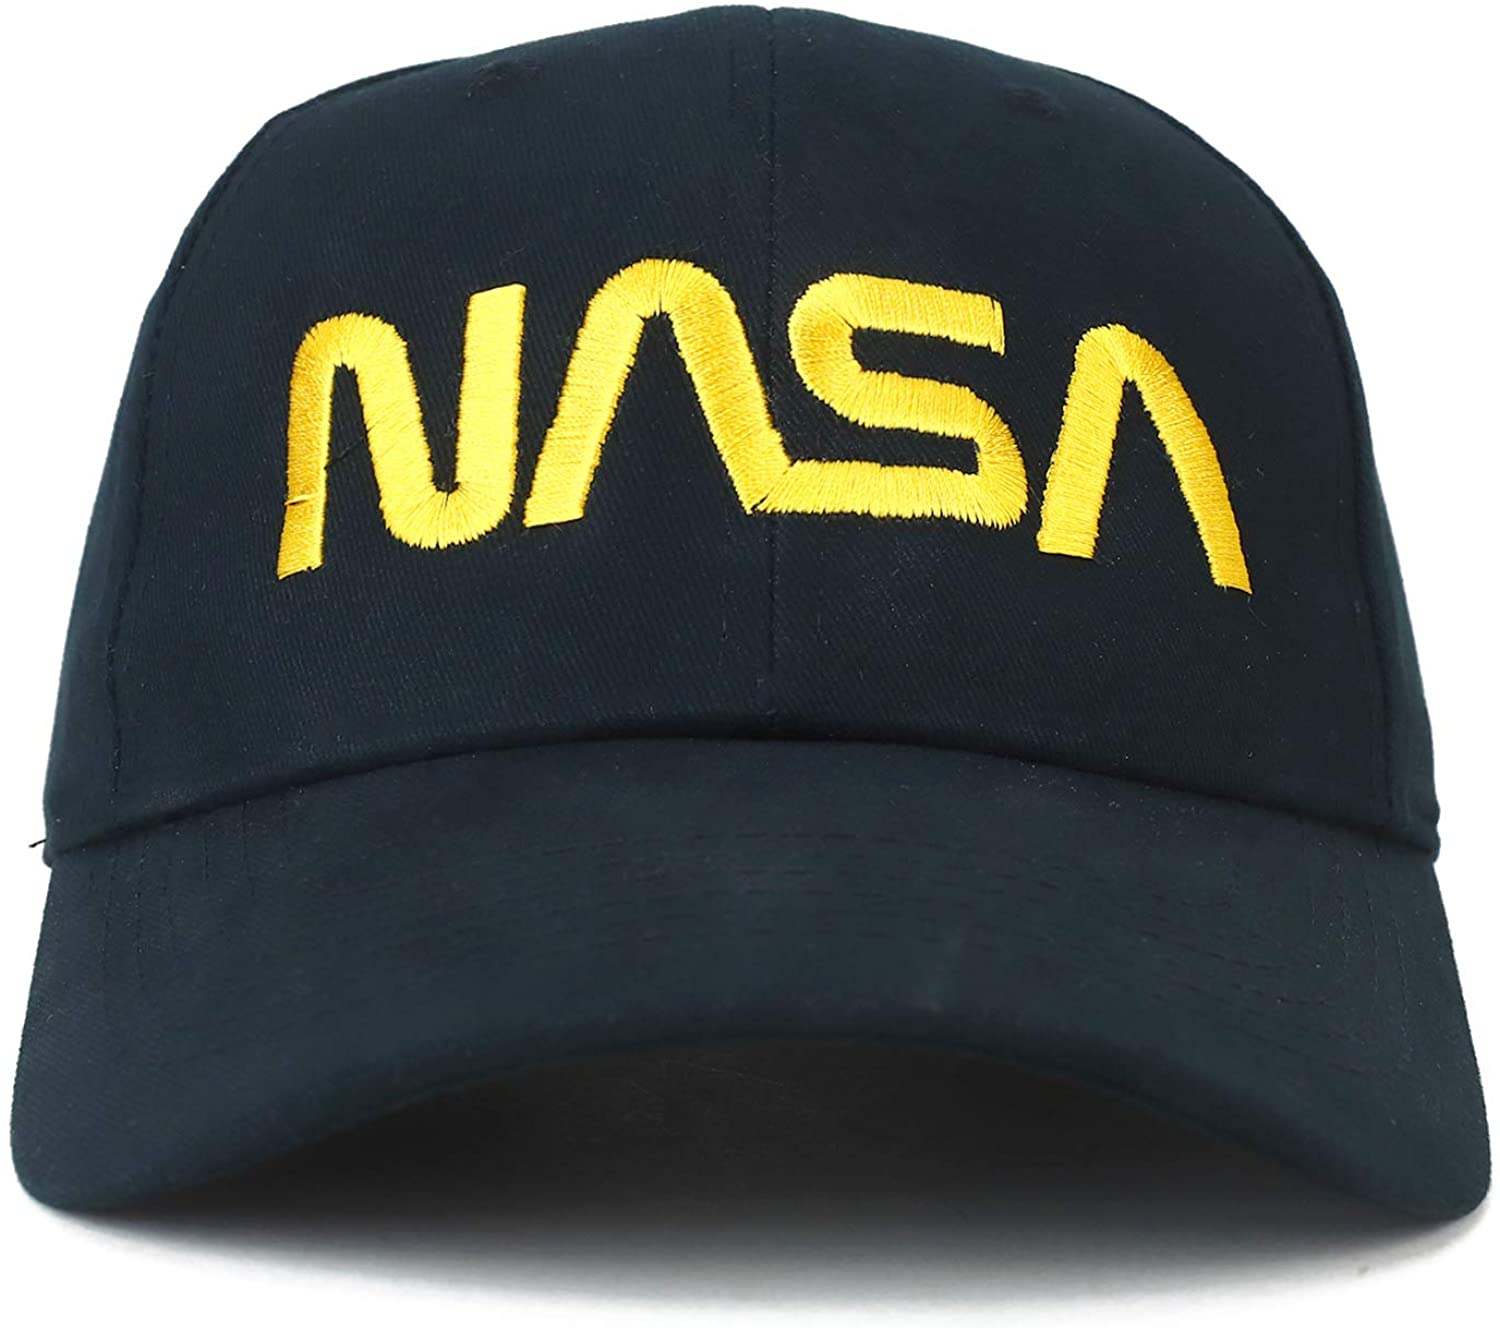 Armycrew NASA Worm Gold Text Embroidered Deluxe Brushed Cotton Baseball Cap